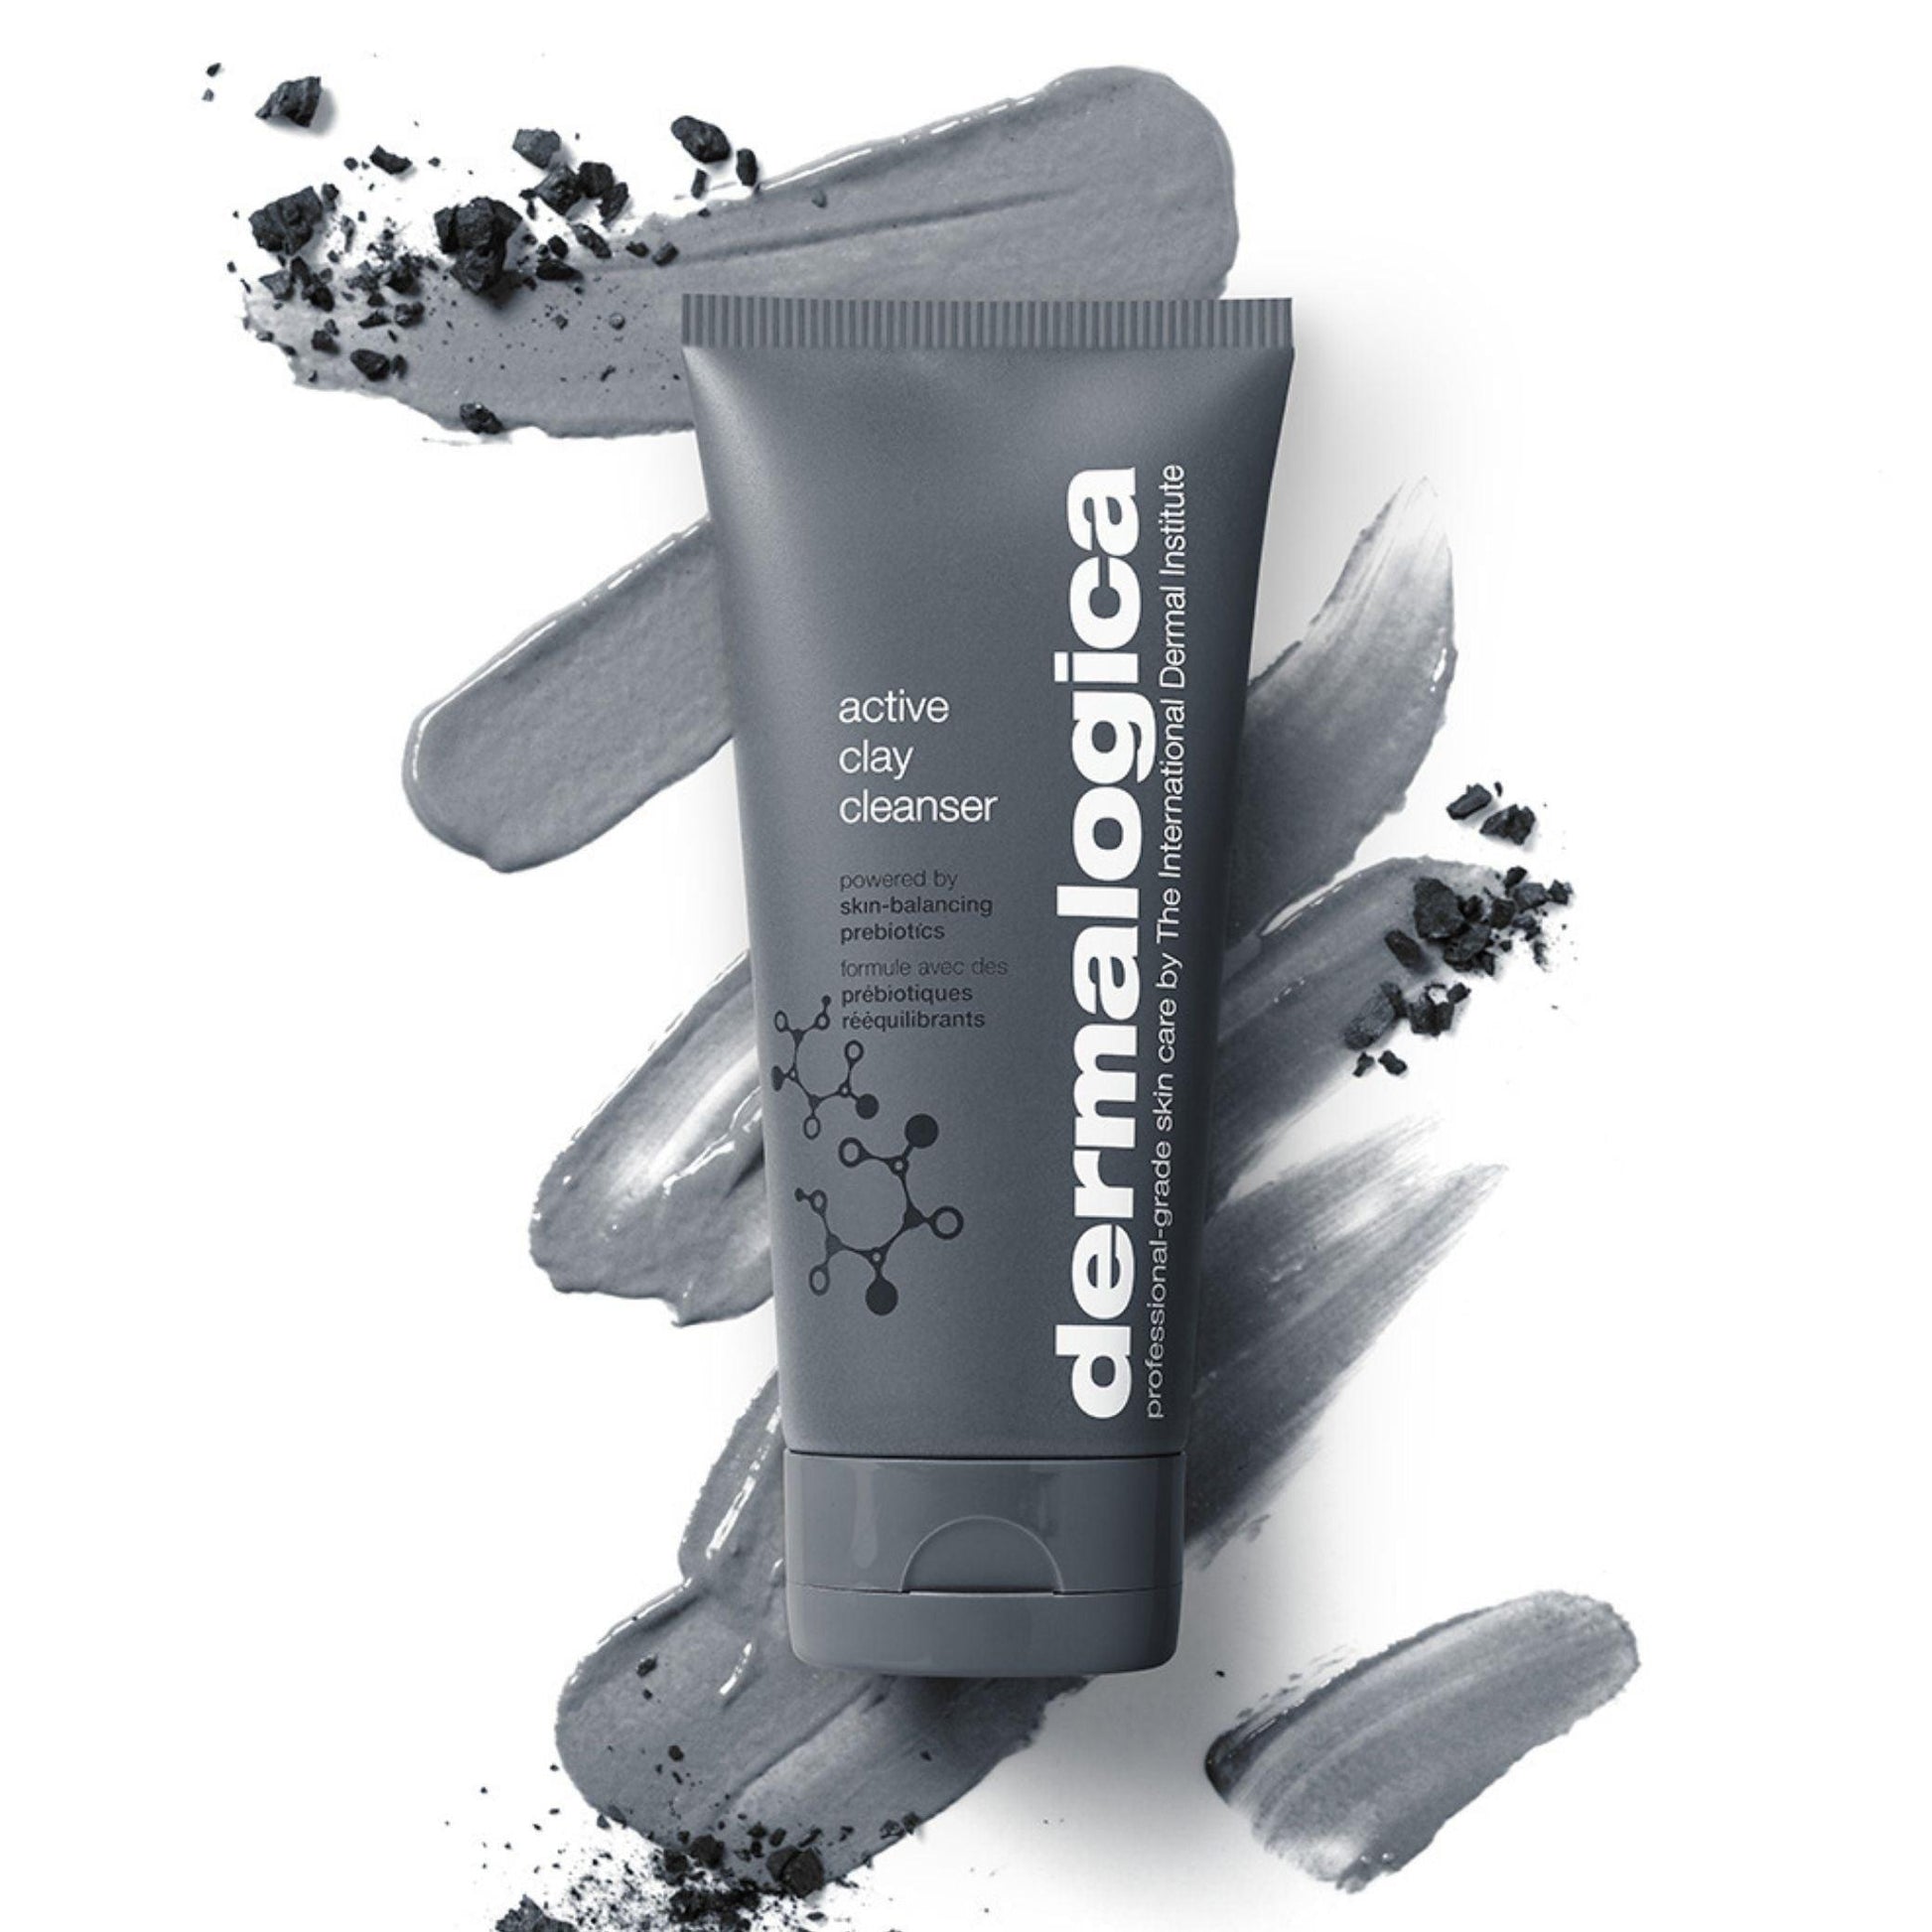 active clay cleanser - Dermalogica Hong Kong